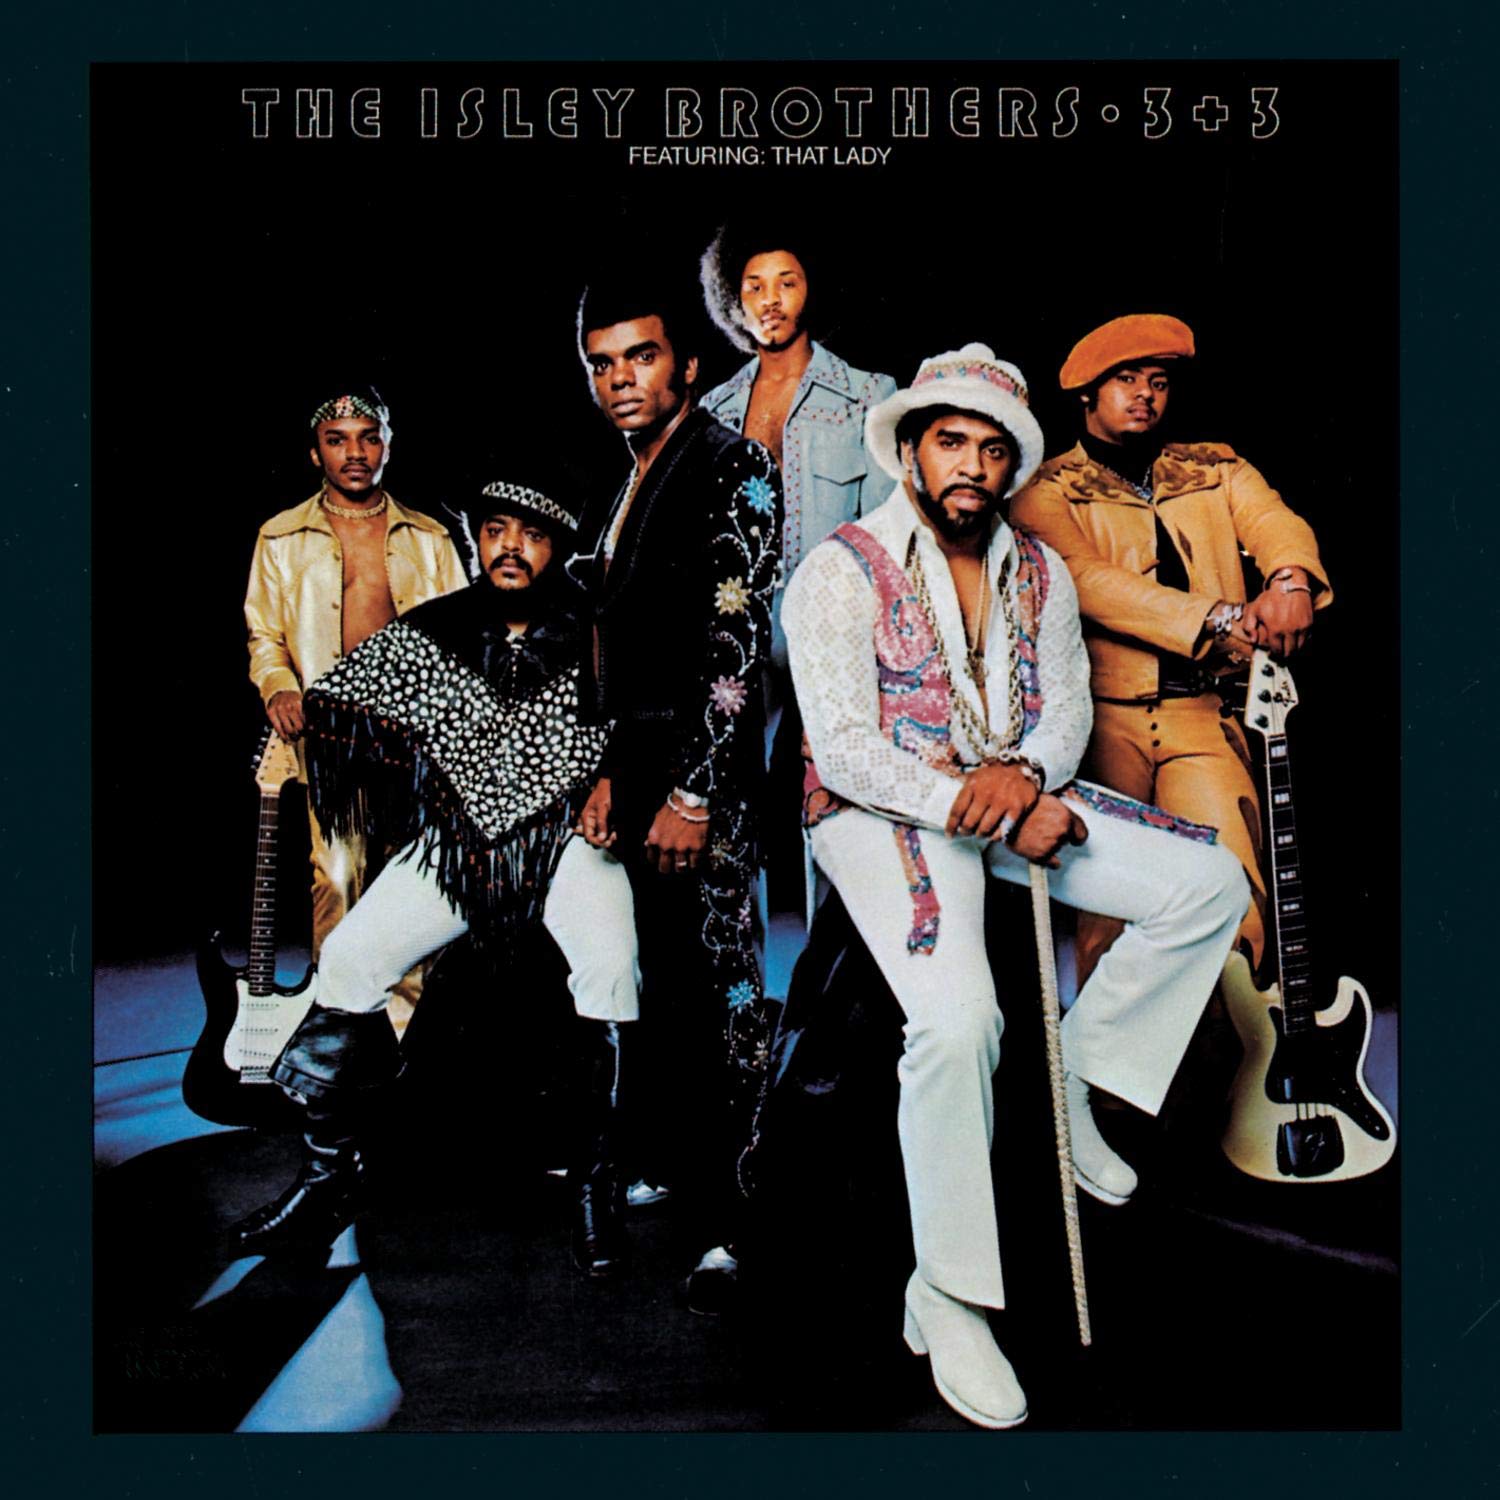 Album Soul : The Isley Brothers - 3 + 3